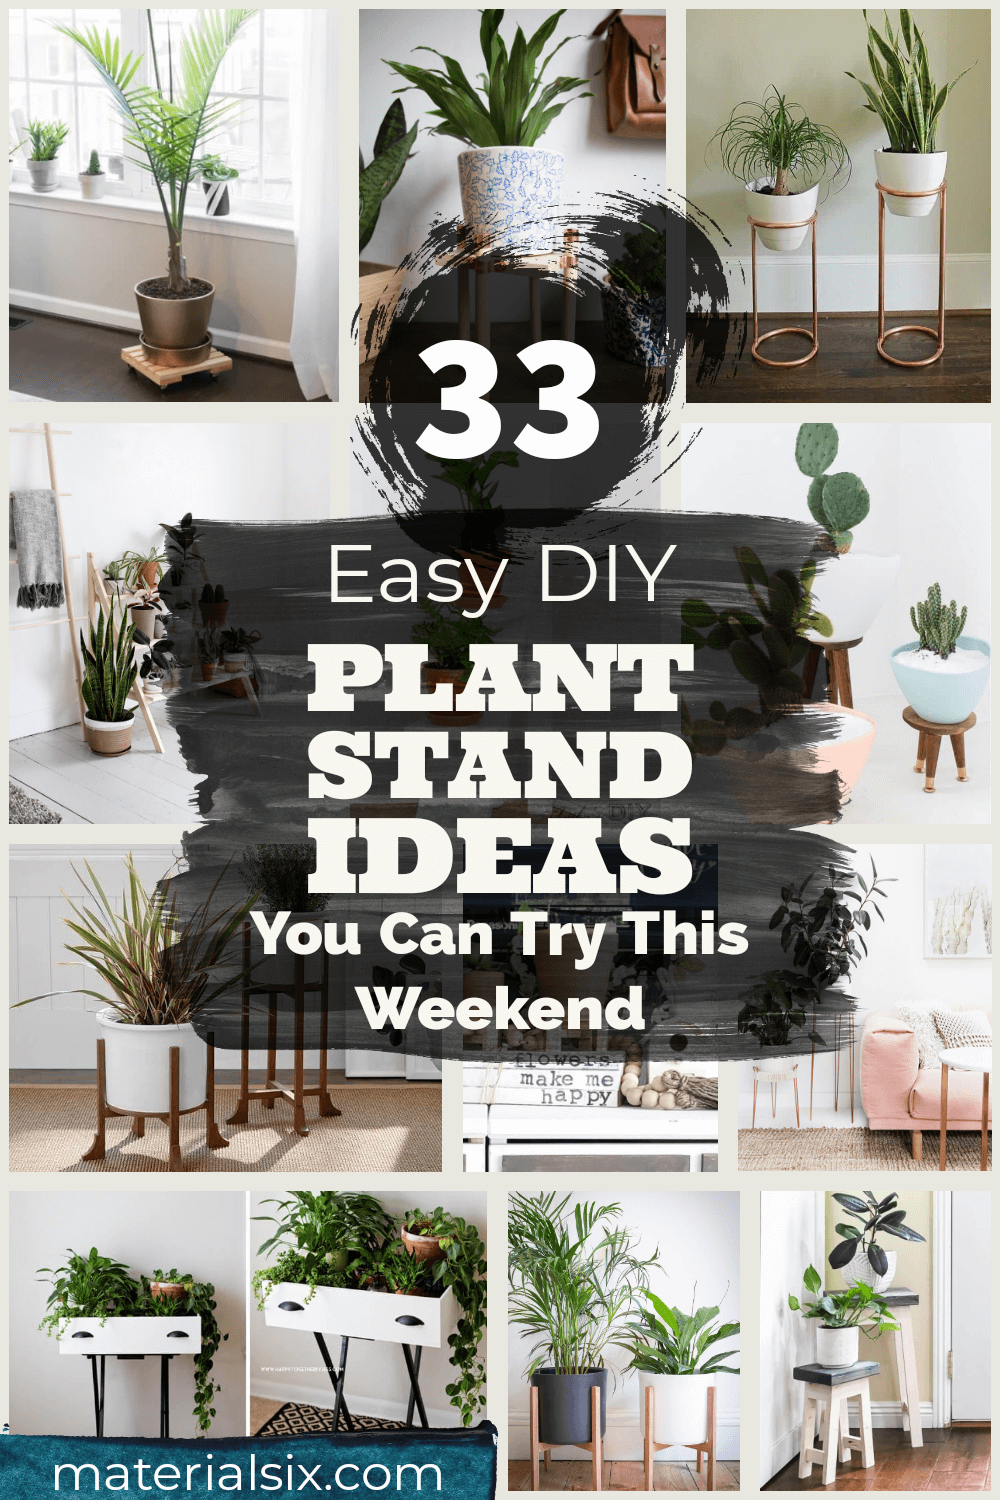 33 Easy DIY Plant Stand Ideas You Can Try This Weekend